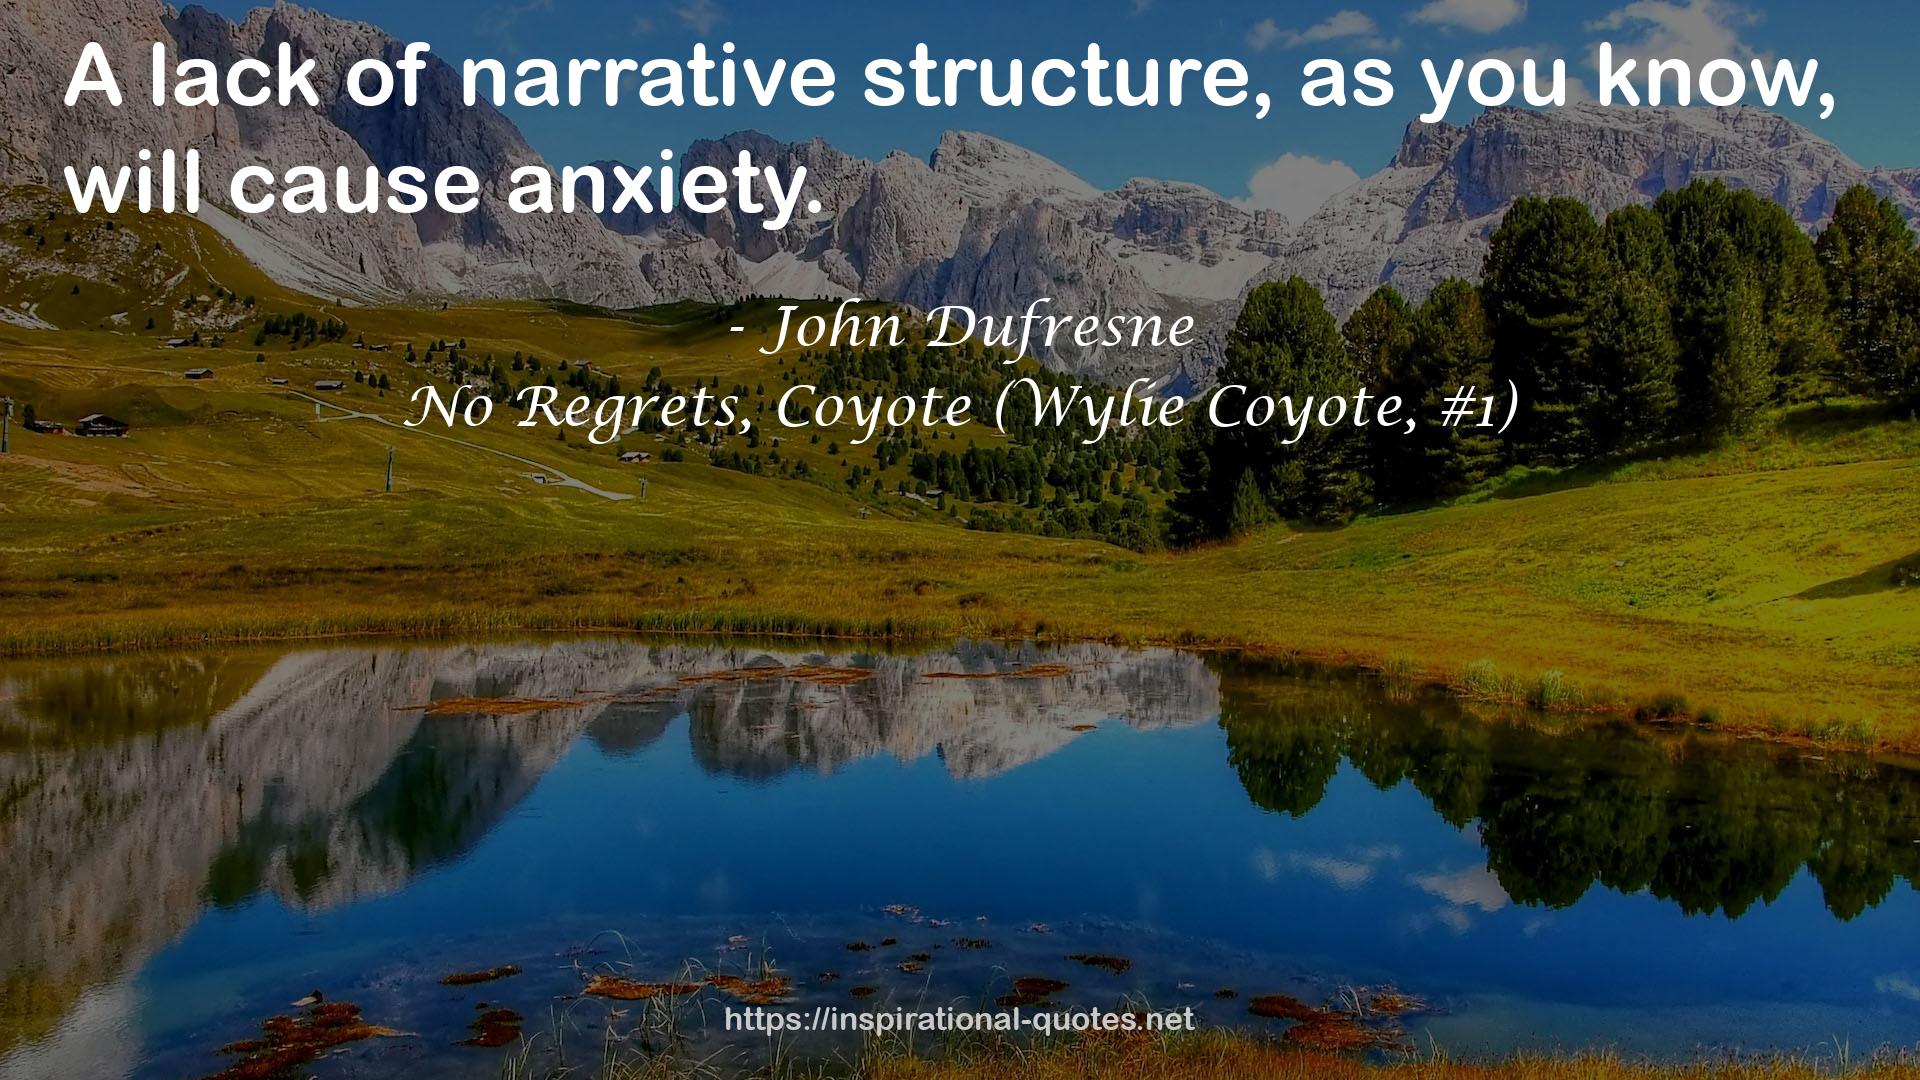 No Regrets, Coyote (Wylie Coyote, #1) QUOTES